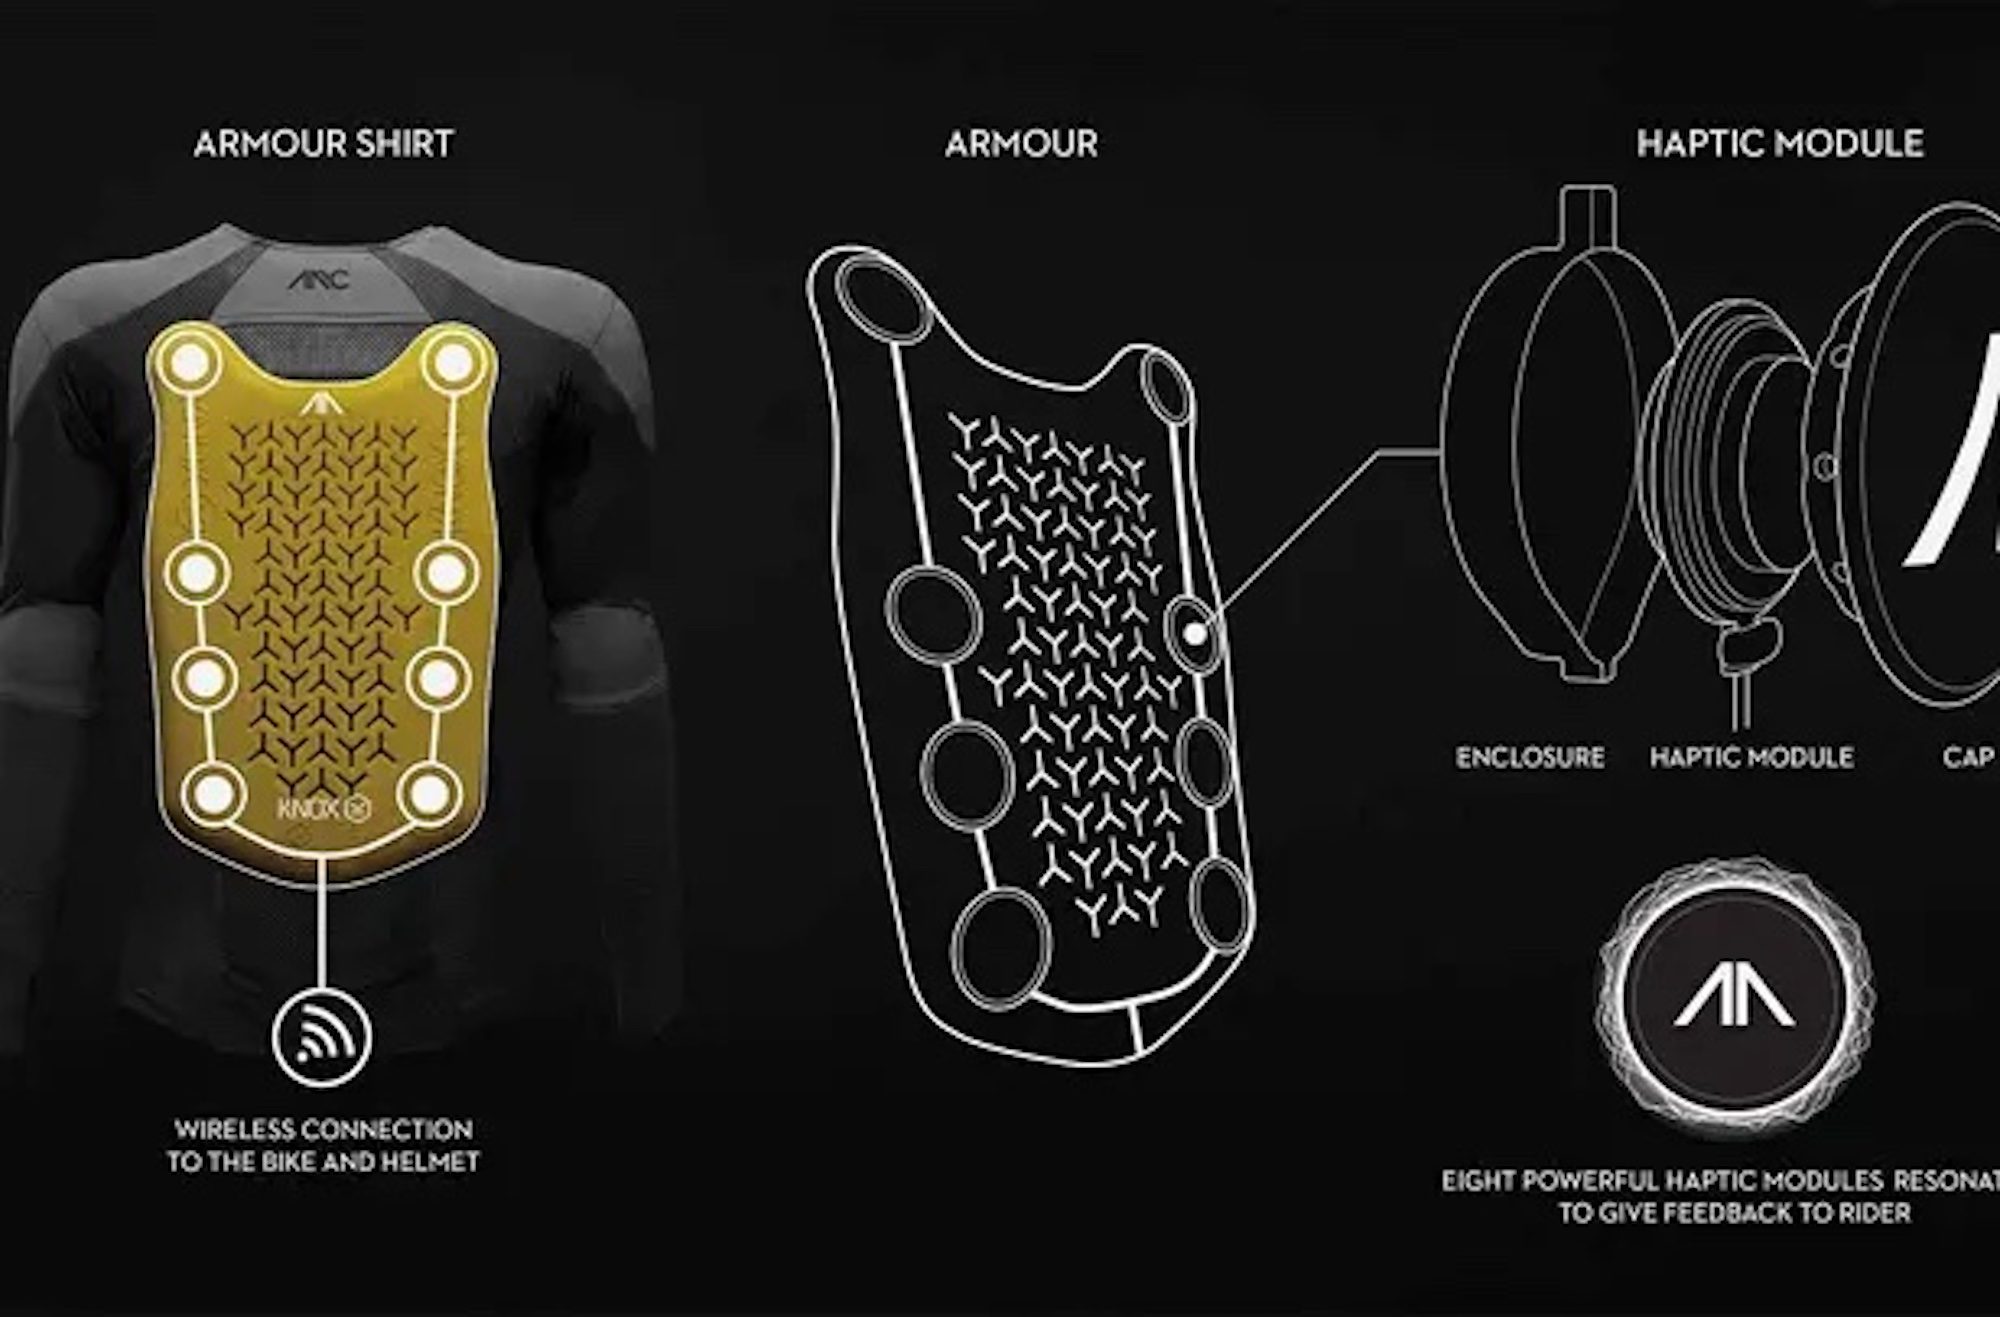 A view of the concept behind the Arc 'Origins' haptic jacket. Media sourced from MCN.